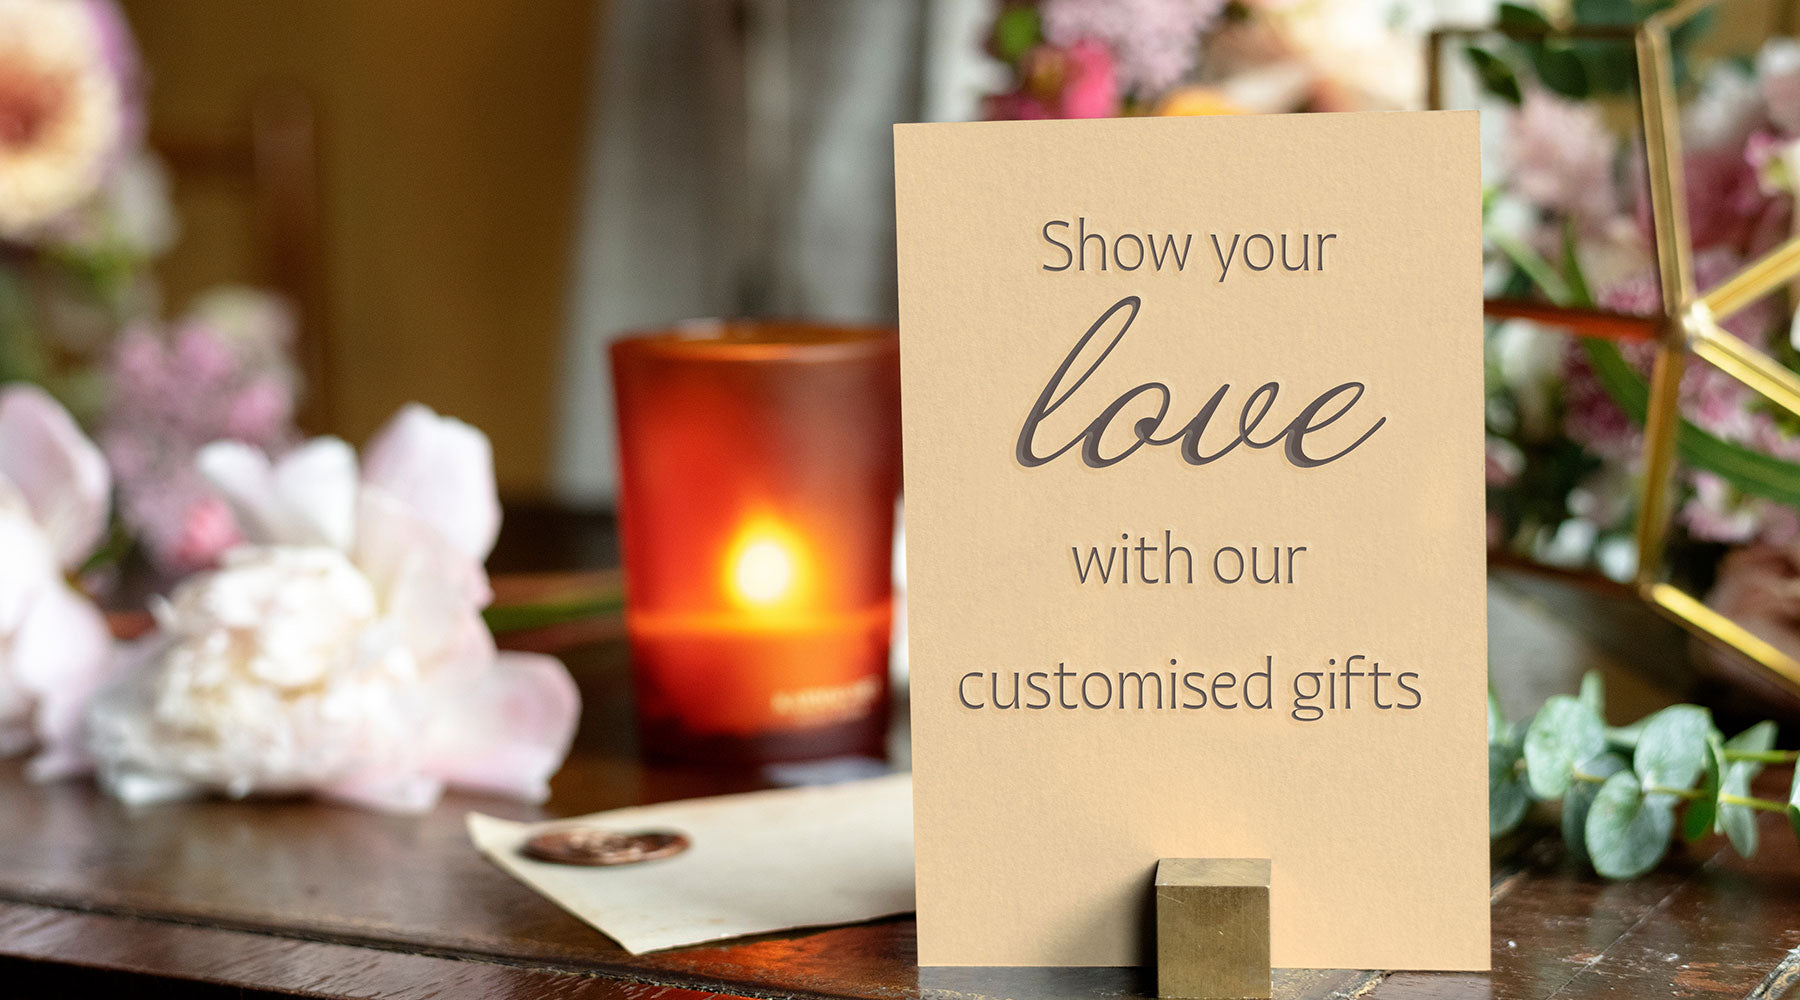 Handmade Husband Gift Quotes of Positivity, Laughter and Loving Thoughts -  31 inspirational quotes for each day of the month. Letterbox friendly. |  Gift quotes, Gifts, Smile gift